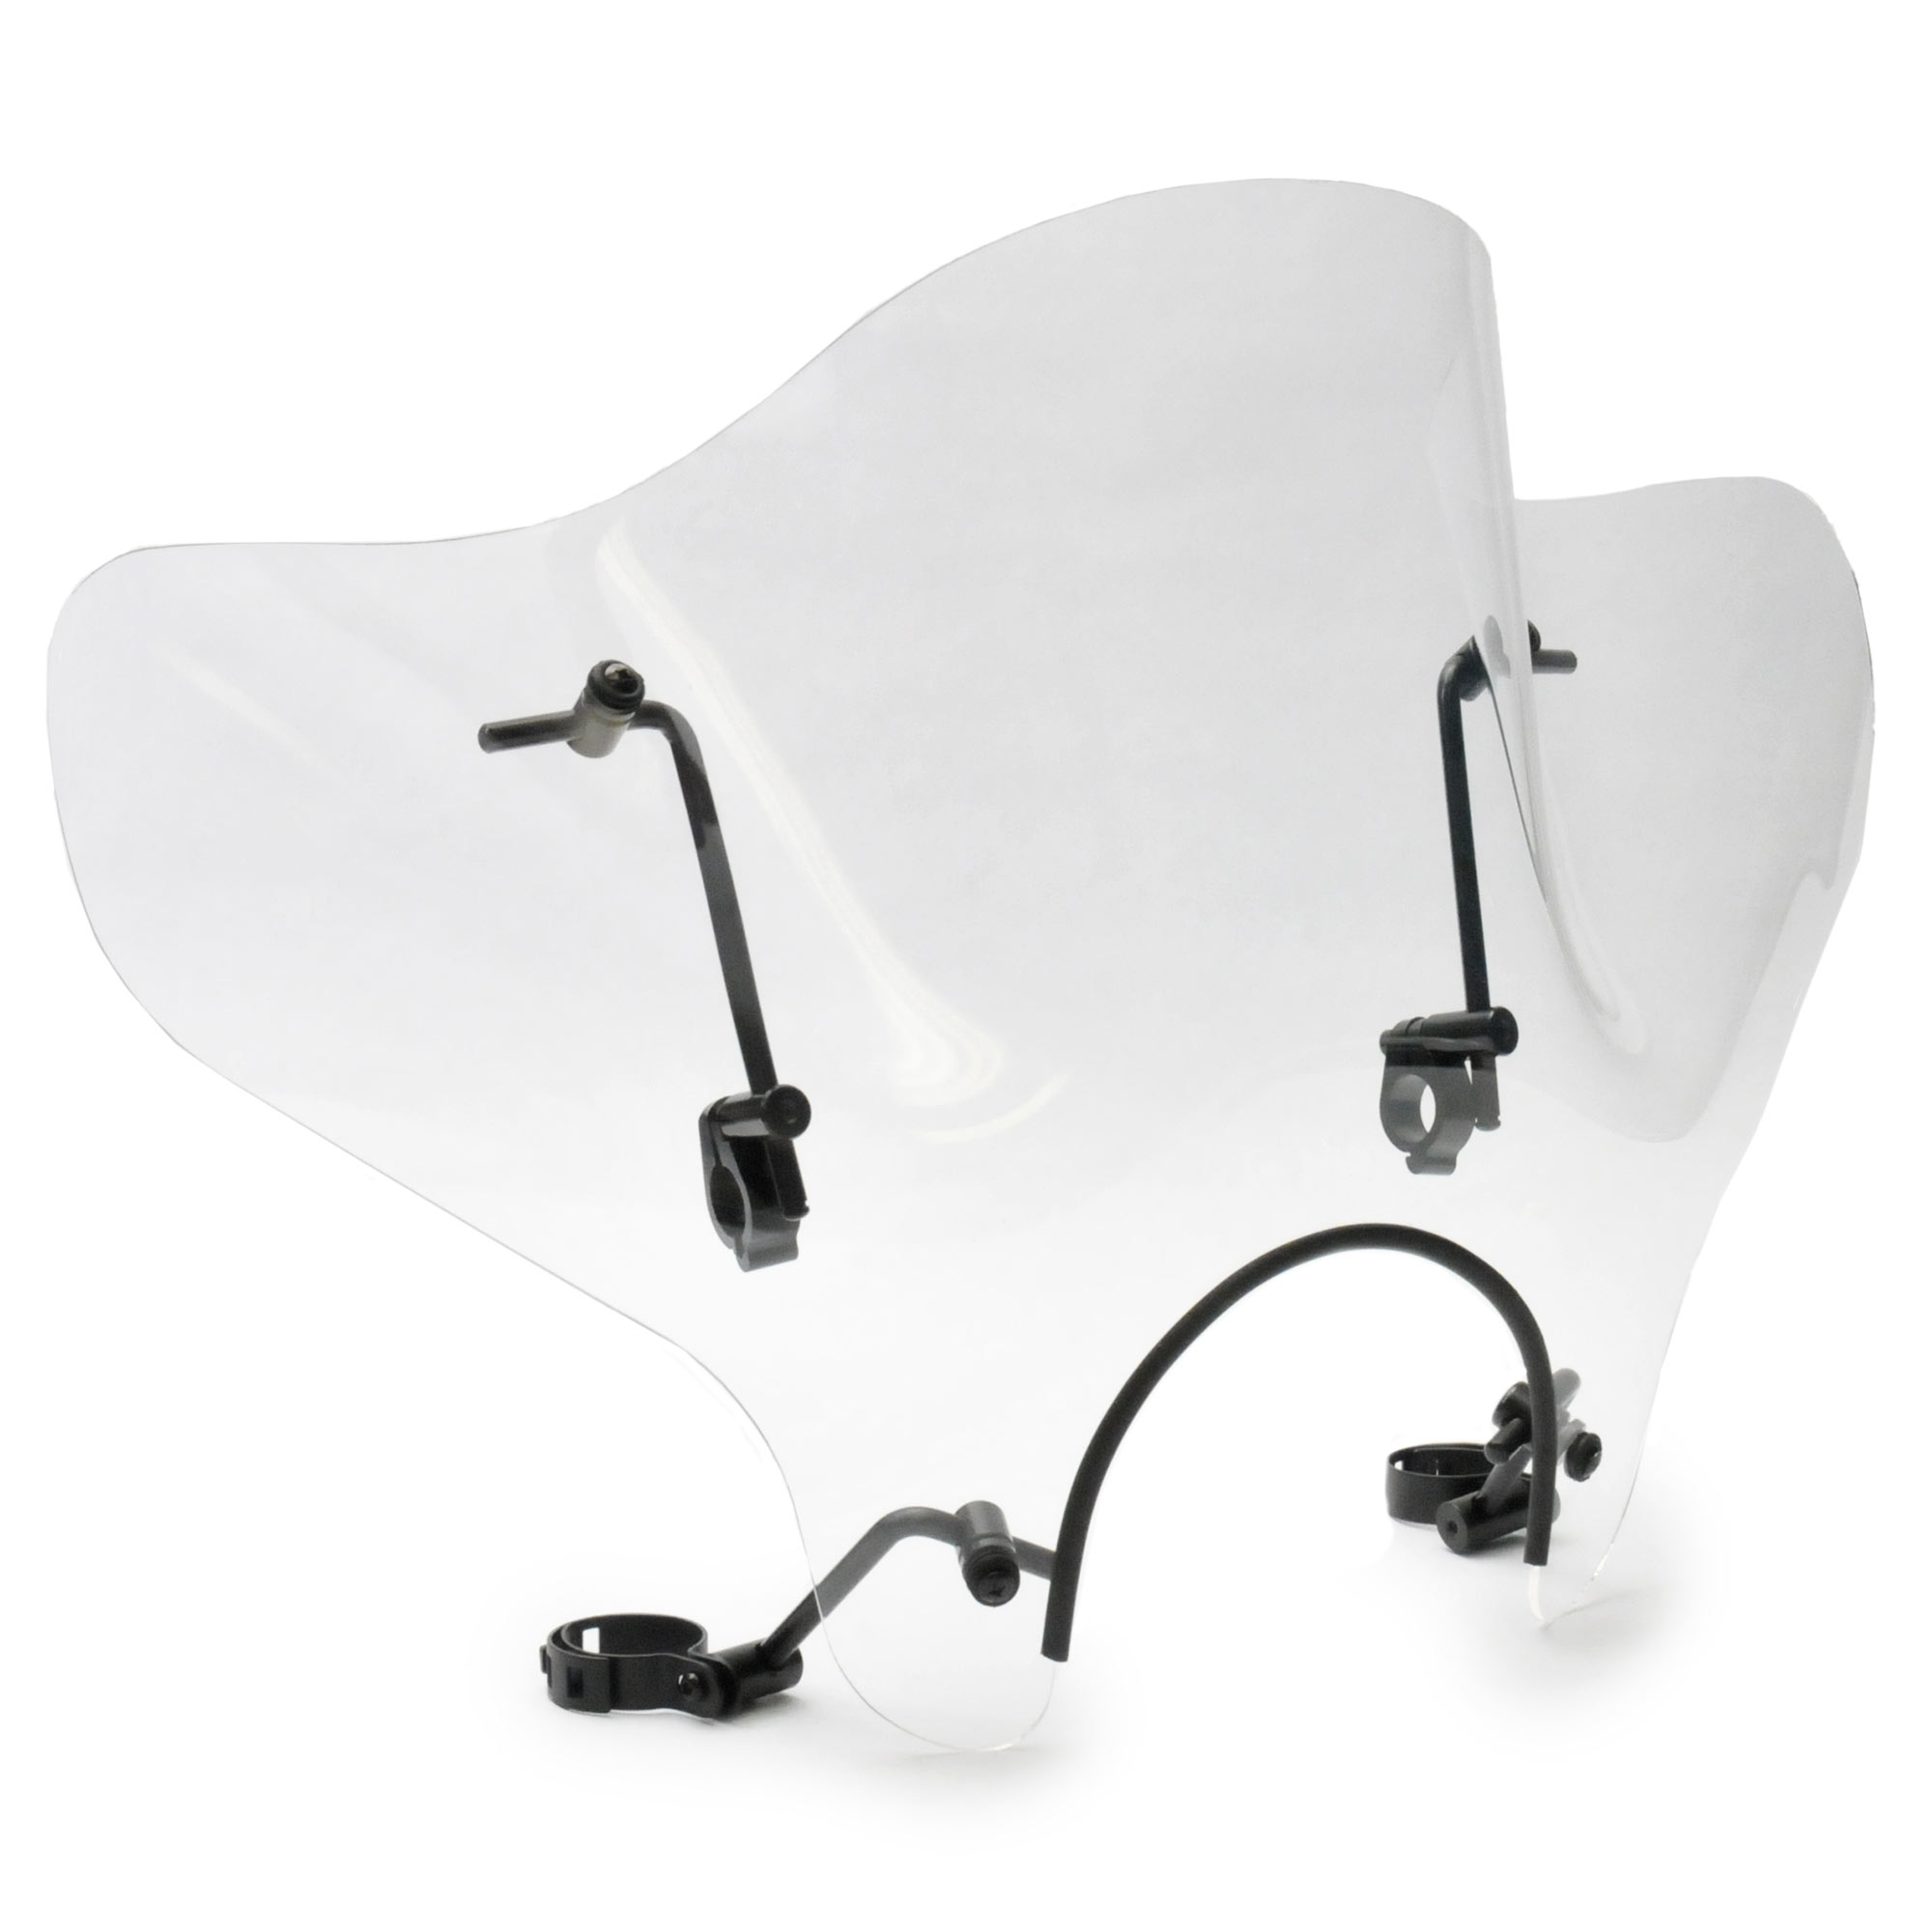 Krator 14" Clear Tinted Windscreen Windshield Compatible with Suzuki Boulevard S50 (2005-2011) Fits 7/8" or 1" Handlebars